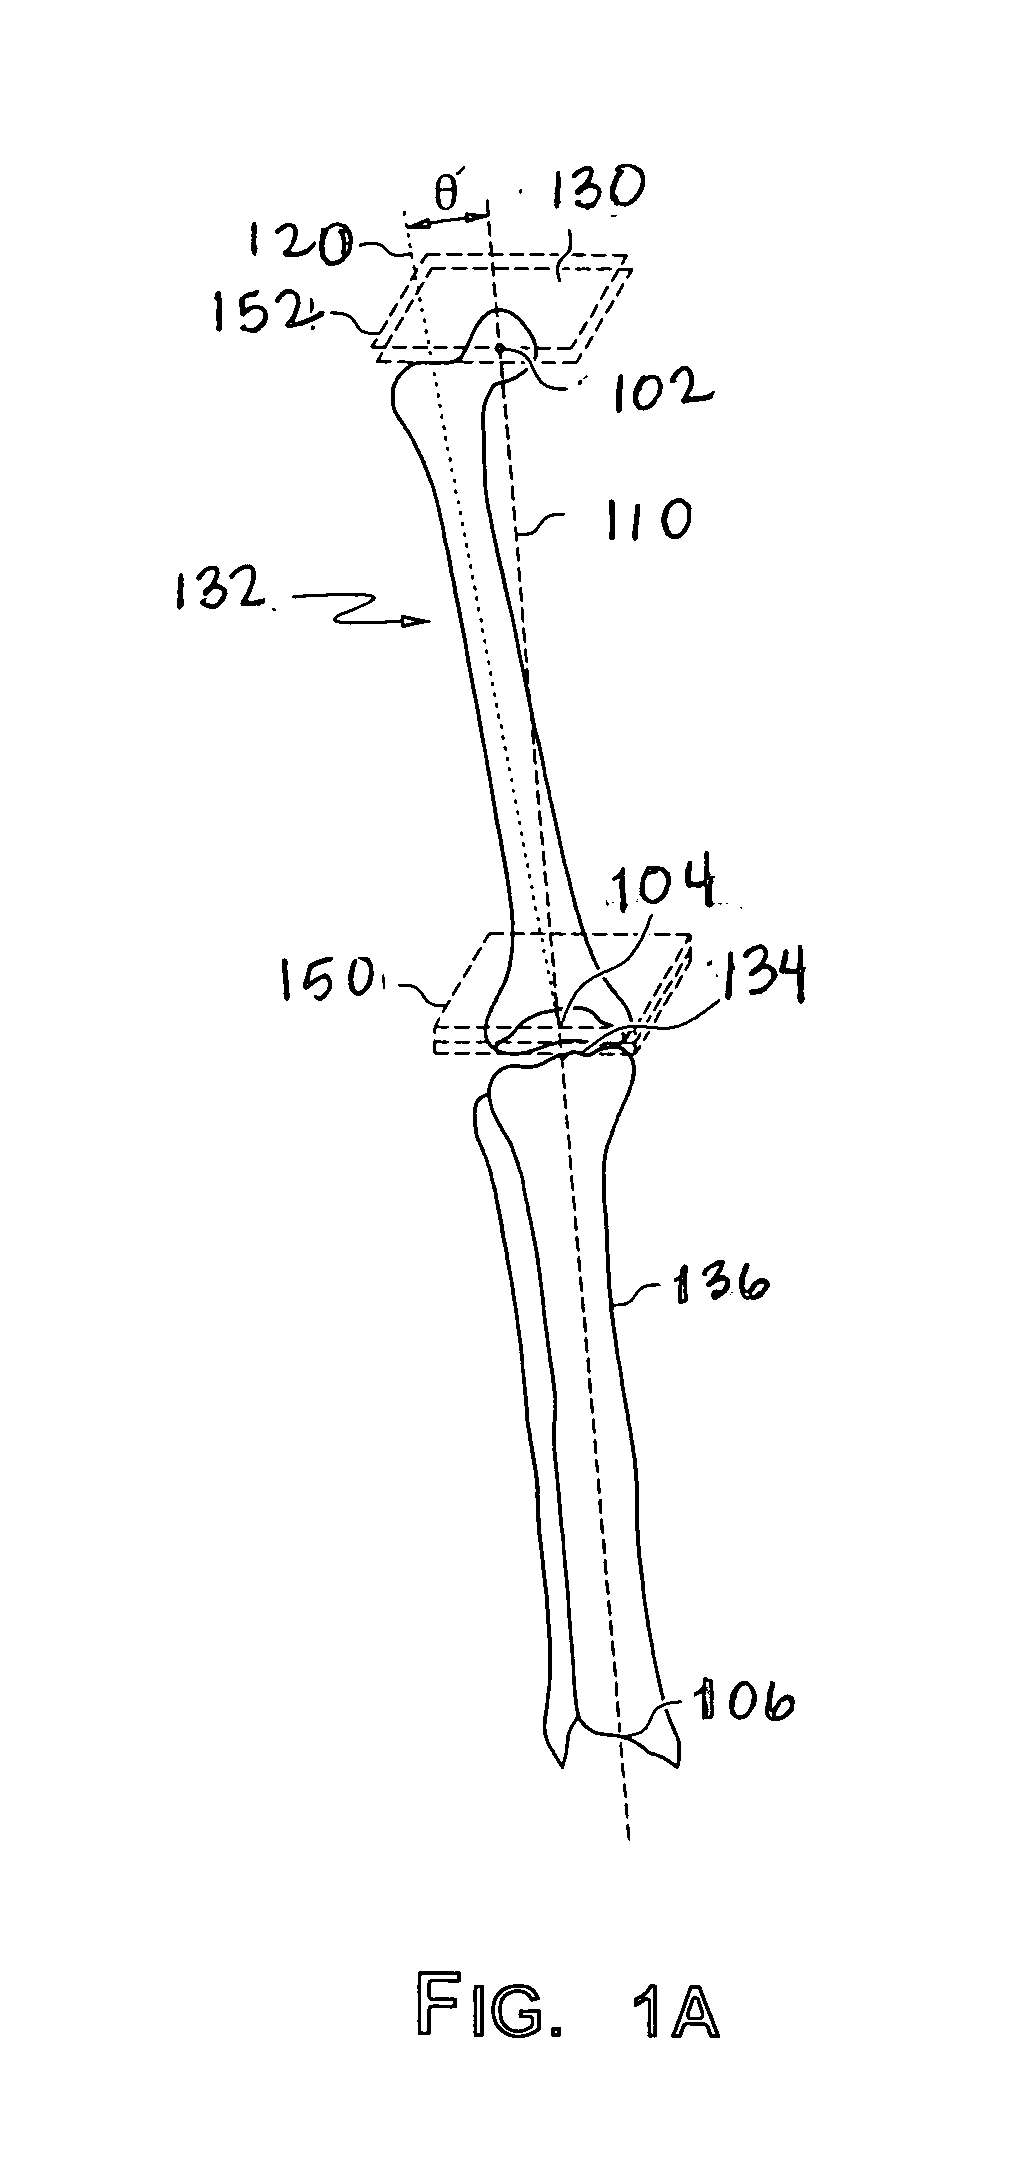 Surgical tools facilitating increased accuracy, speed and simplicity in performing joint arthroplasty